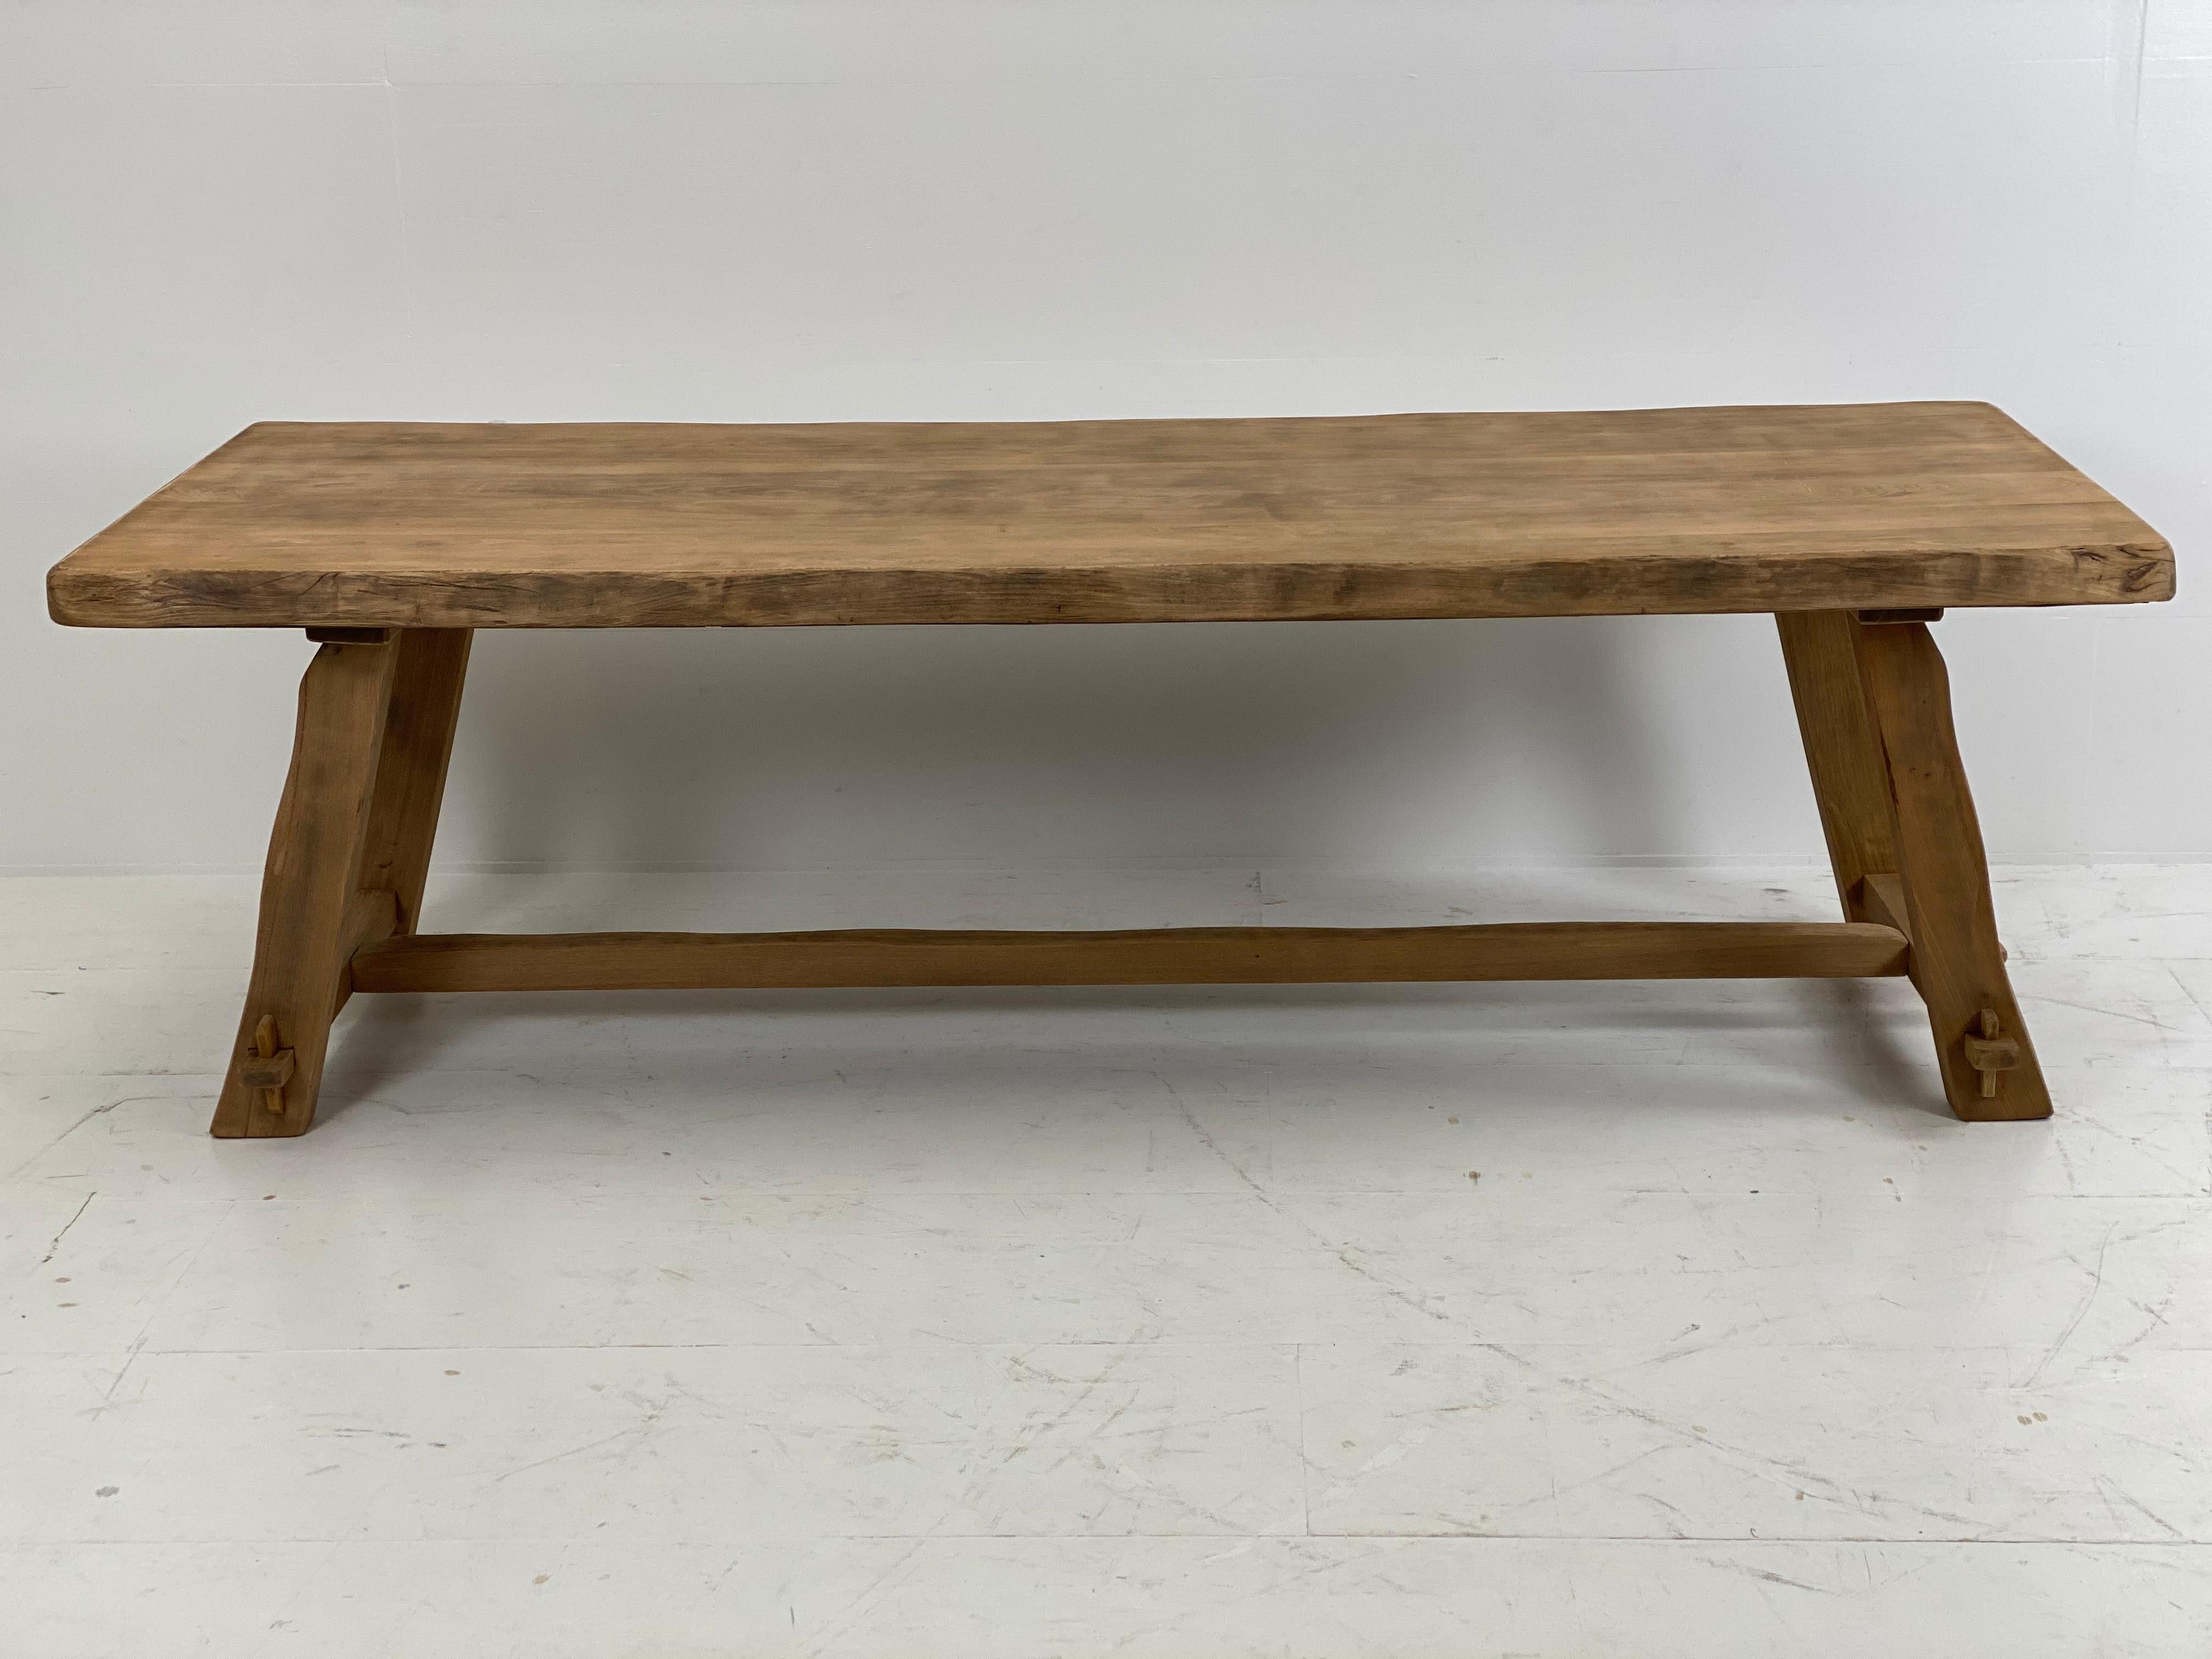 Massive  Bleached Elm wood Dining Table by Olavi Hanninen, for Miko Nupponen, Finland,1959
top is 7 cm thick,
nice bleached patina,
can be used in the kitchen or as a writing desk or a console table.